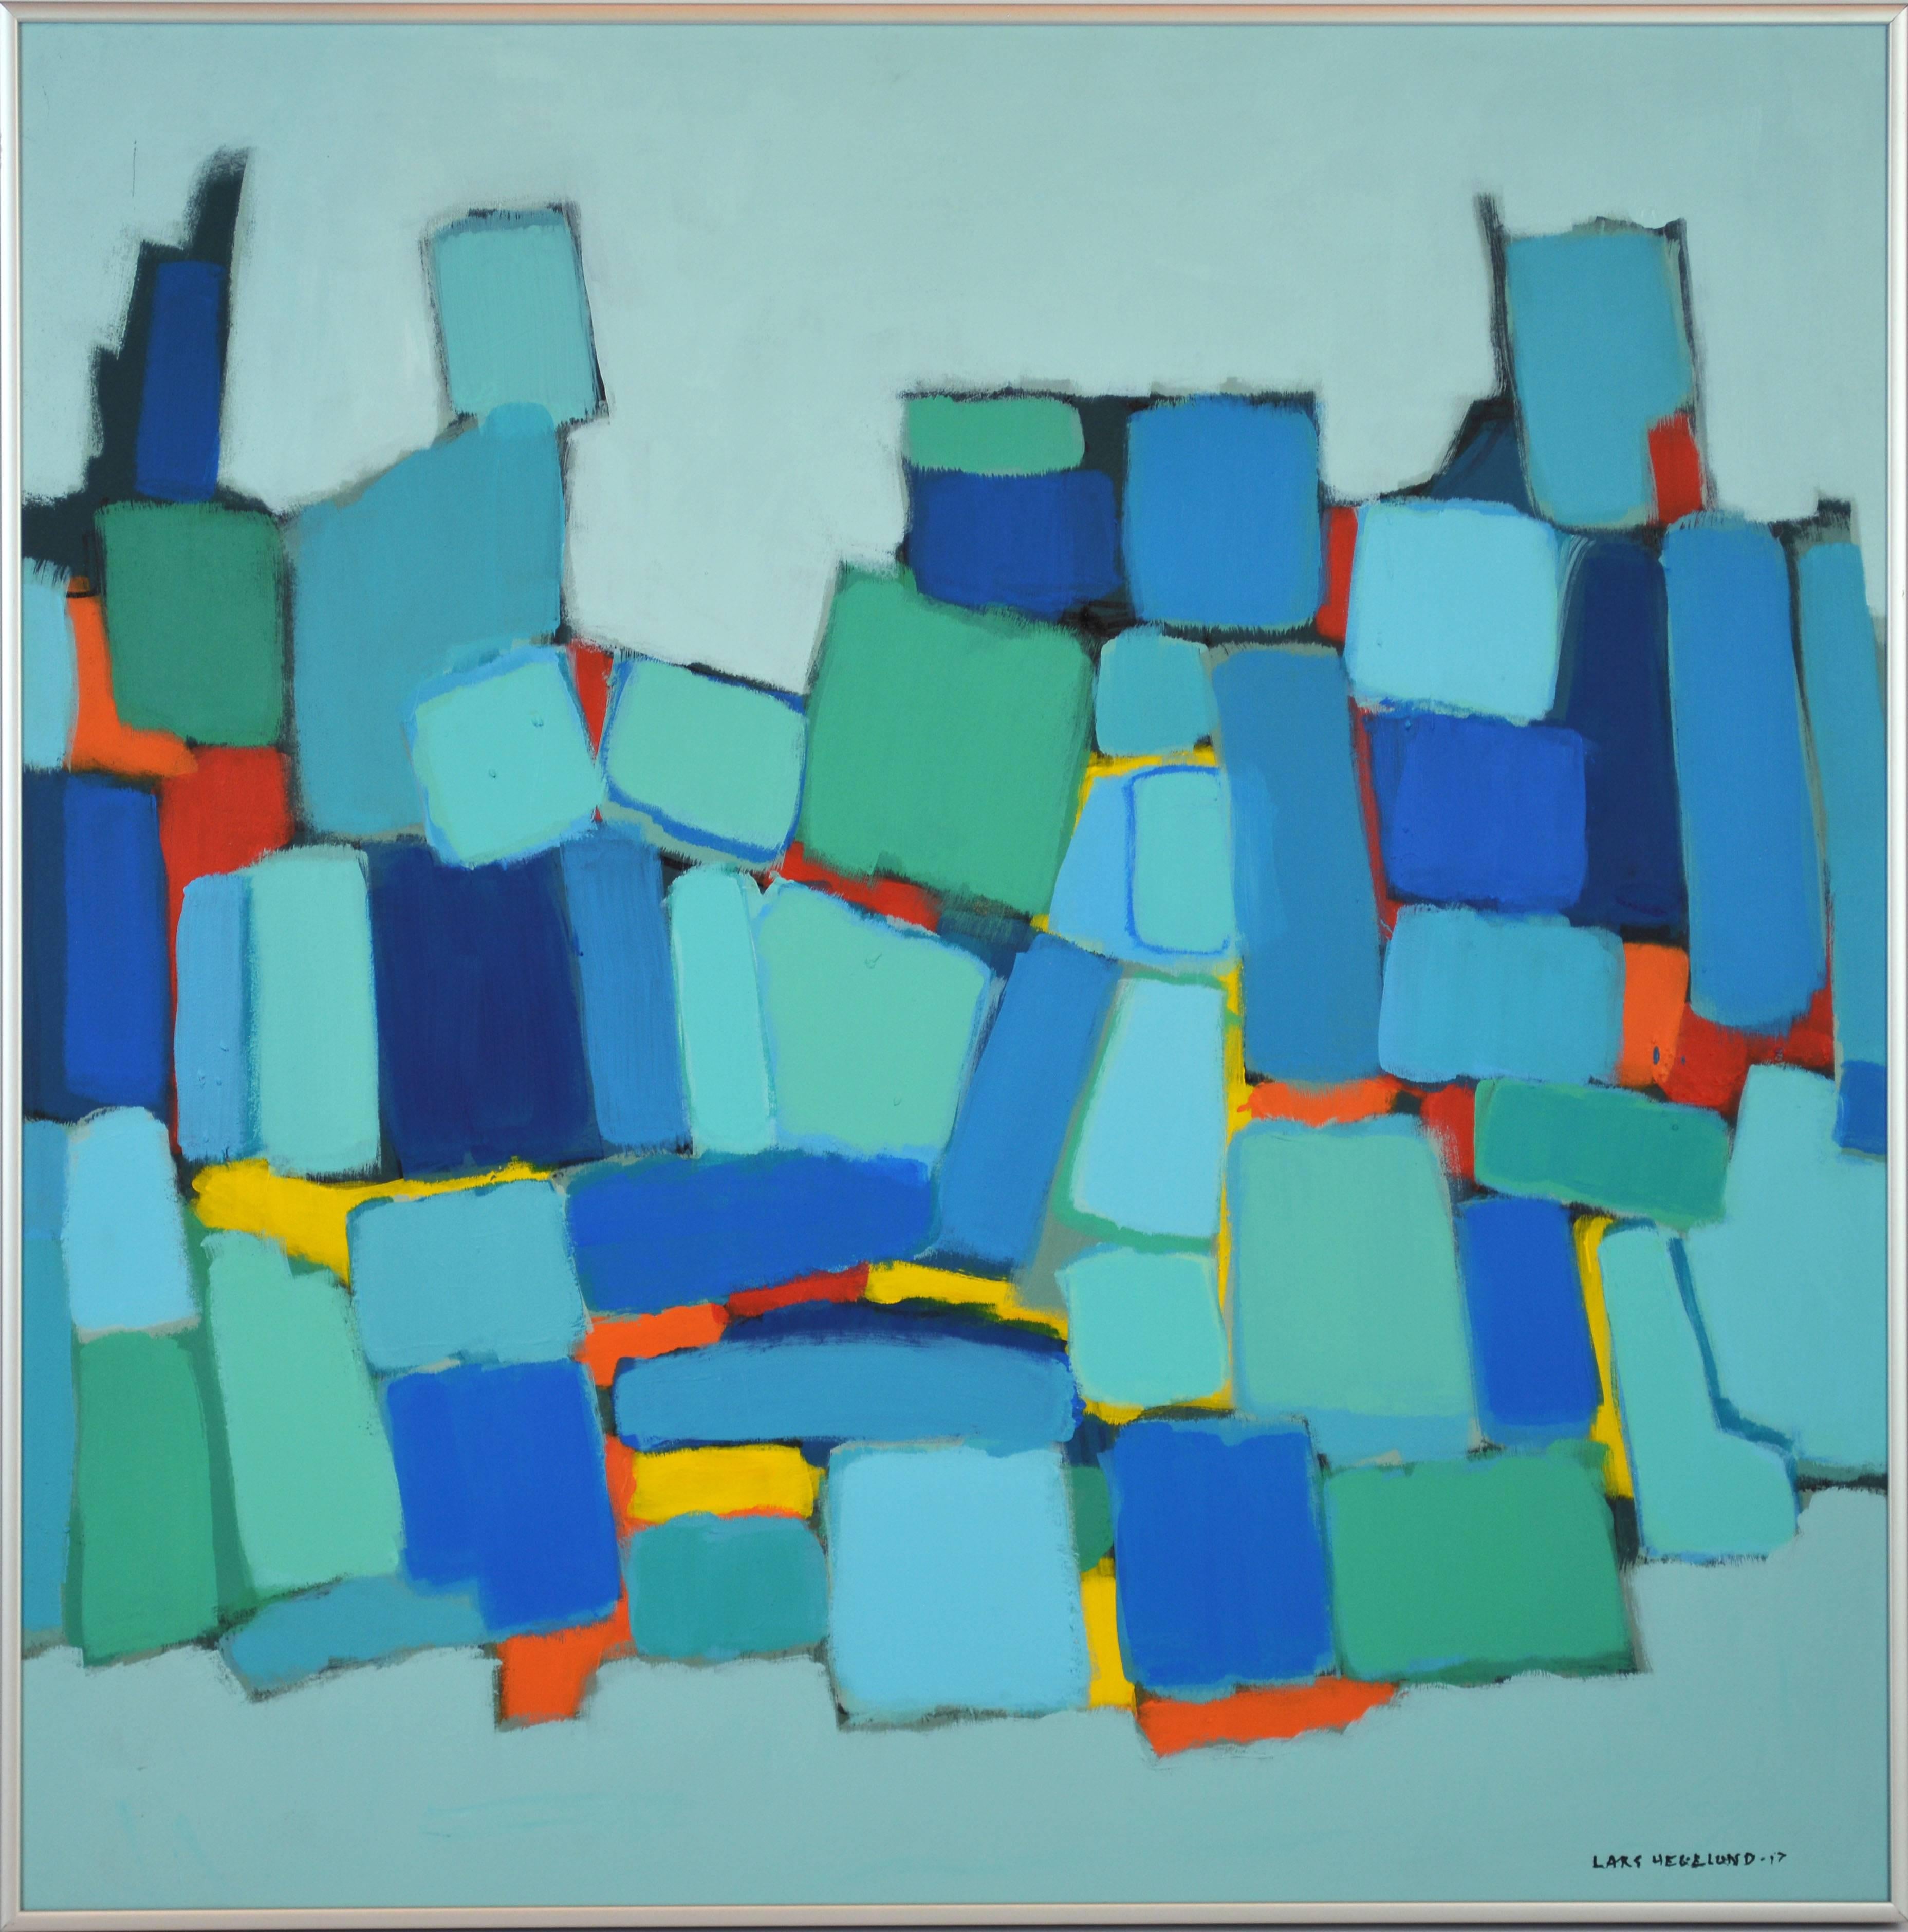 'Sunset Avenue'
by Lars Hegelund, American, b. 1947.
Measures: 24 x 24 in without frame 25 x 25 in. including frame,
Acrylic on panel, signed.
Housed in a Minimalist style brushed aluminium frame.

AAbout Lars Hegelund:
Lars Hegelund